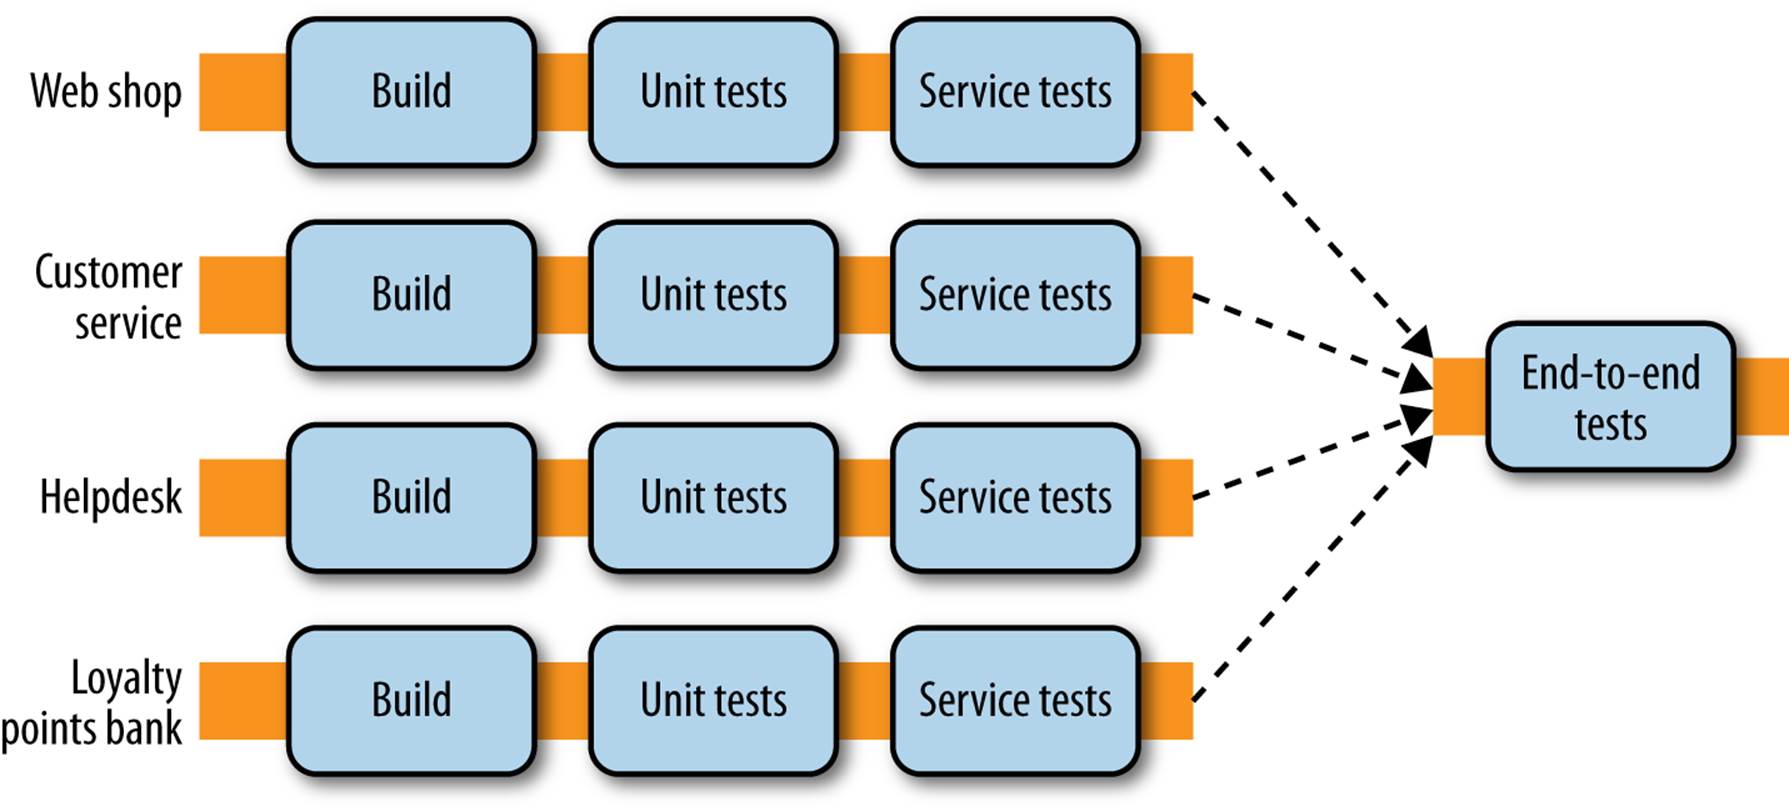 A standard way to handle end-to-end tests across services